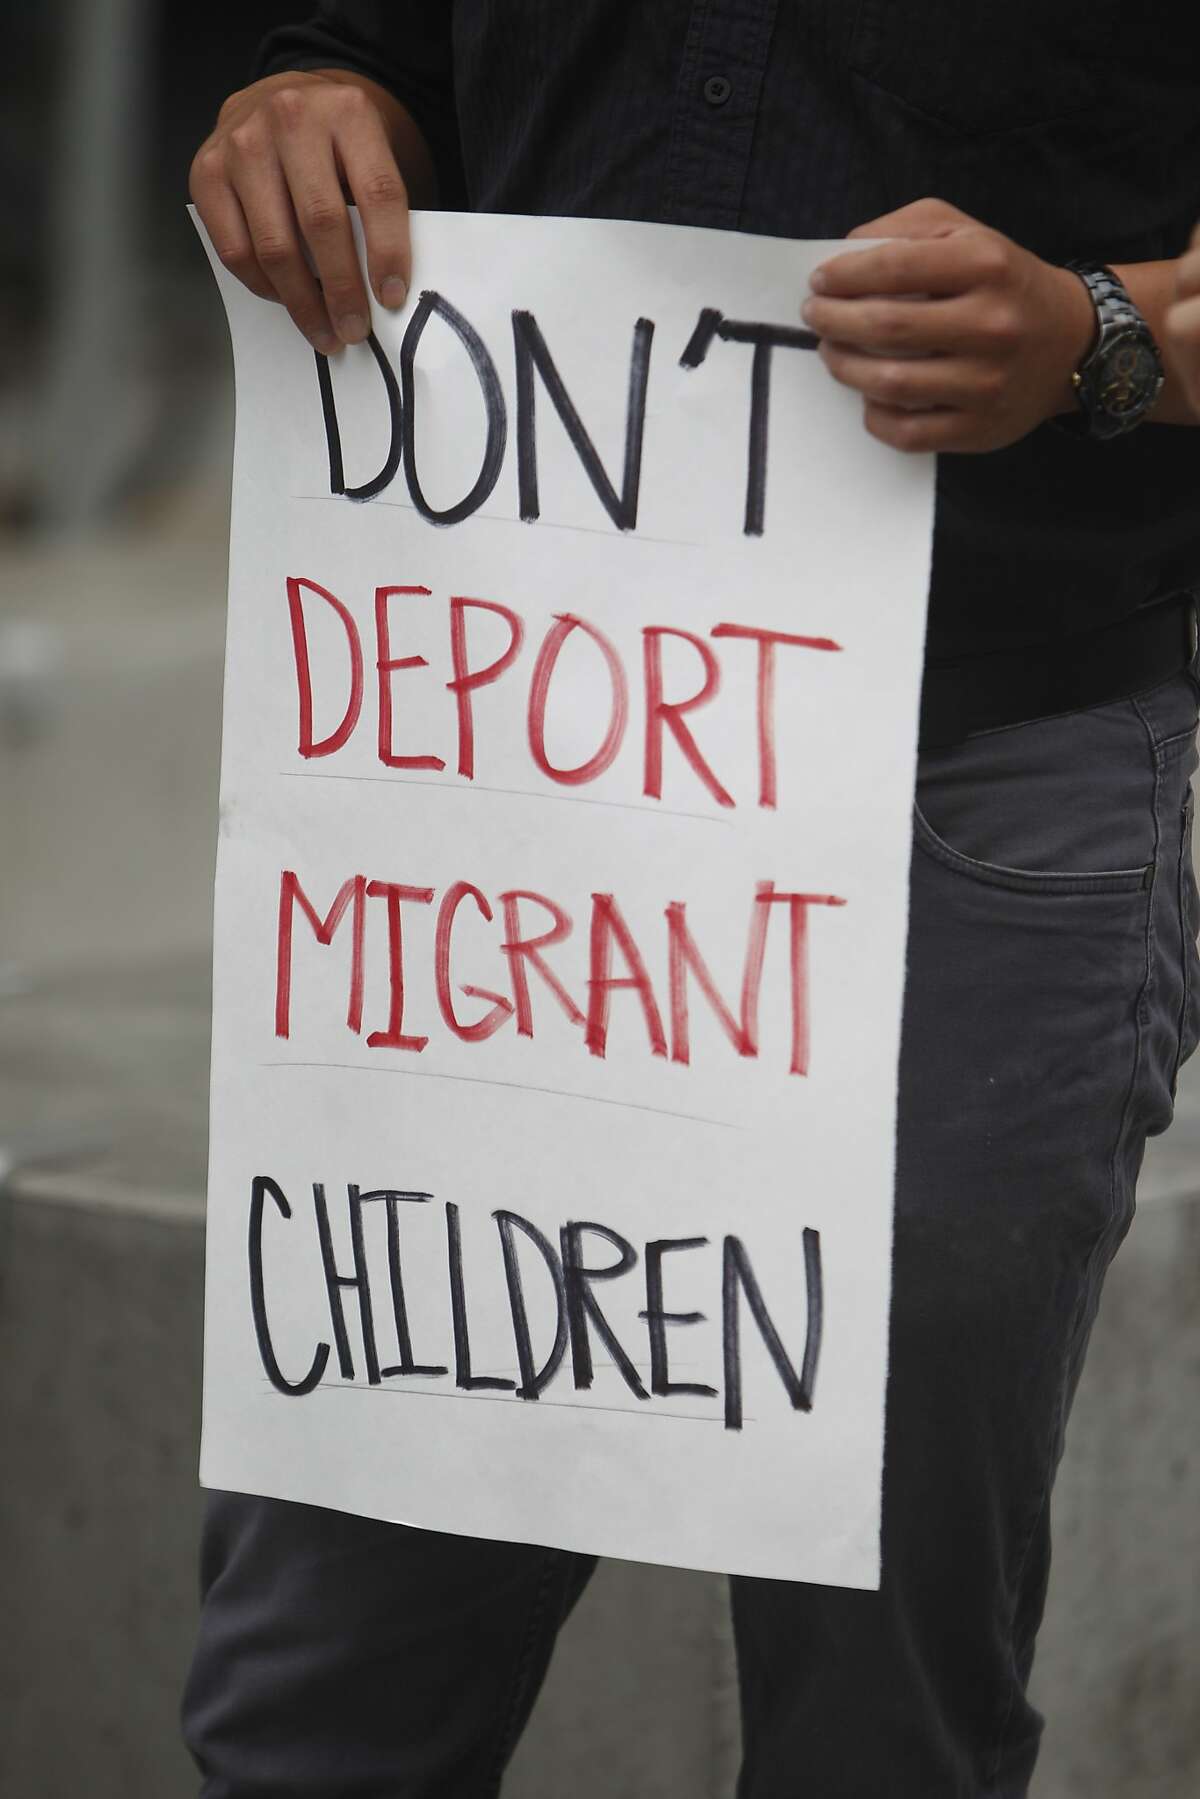 A demonstrator holds a sign during a press conference at the San Francisco Federal Building where immigrant rights groups gathered to demand recognition for children refugees entering the United States on Monday, July 21, 2014 in San Francisco, Calif.